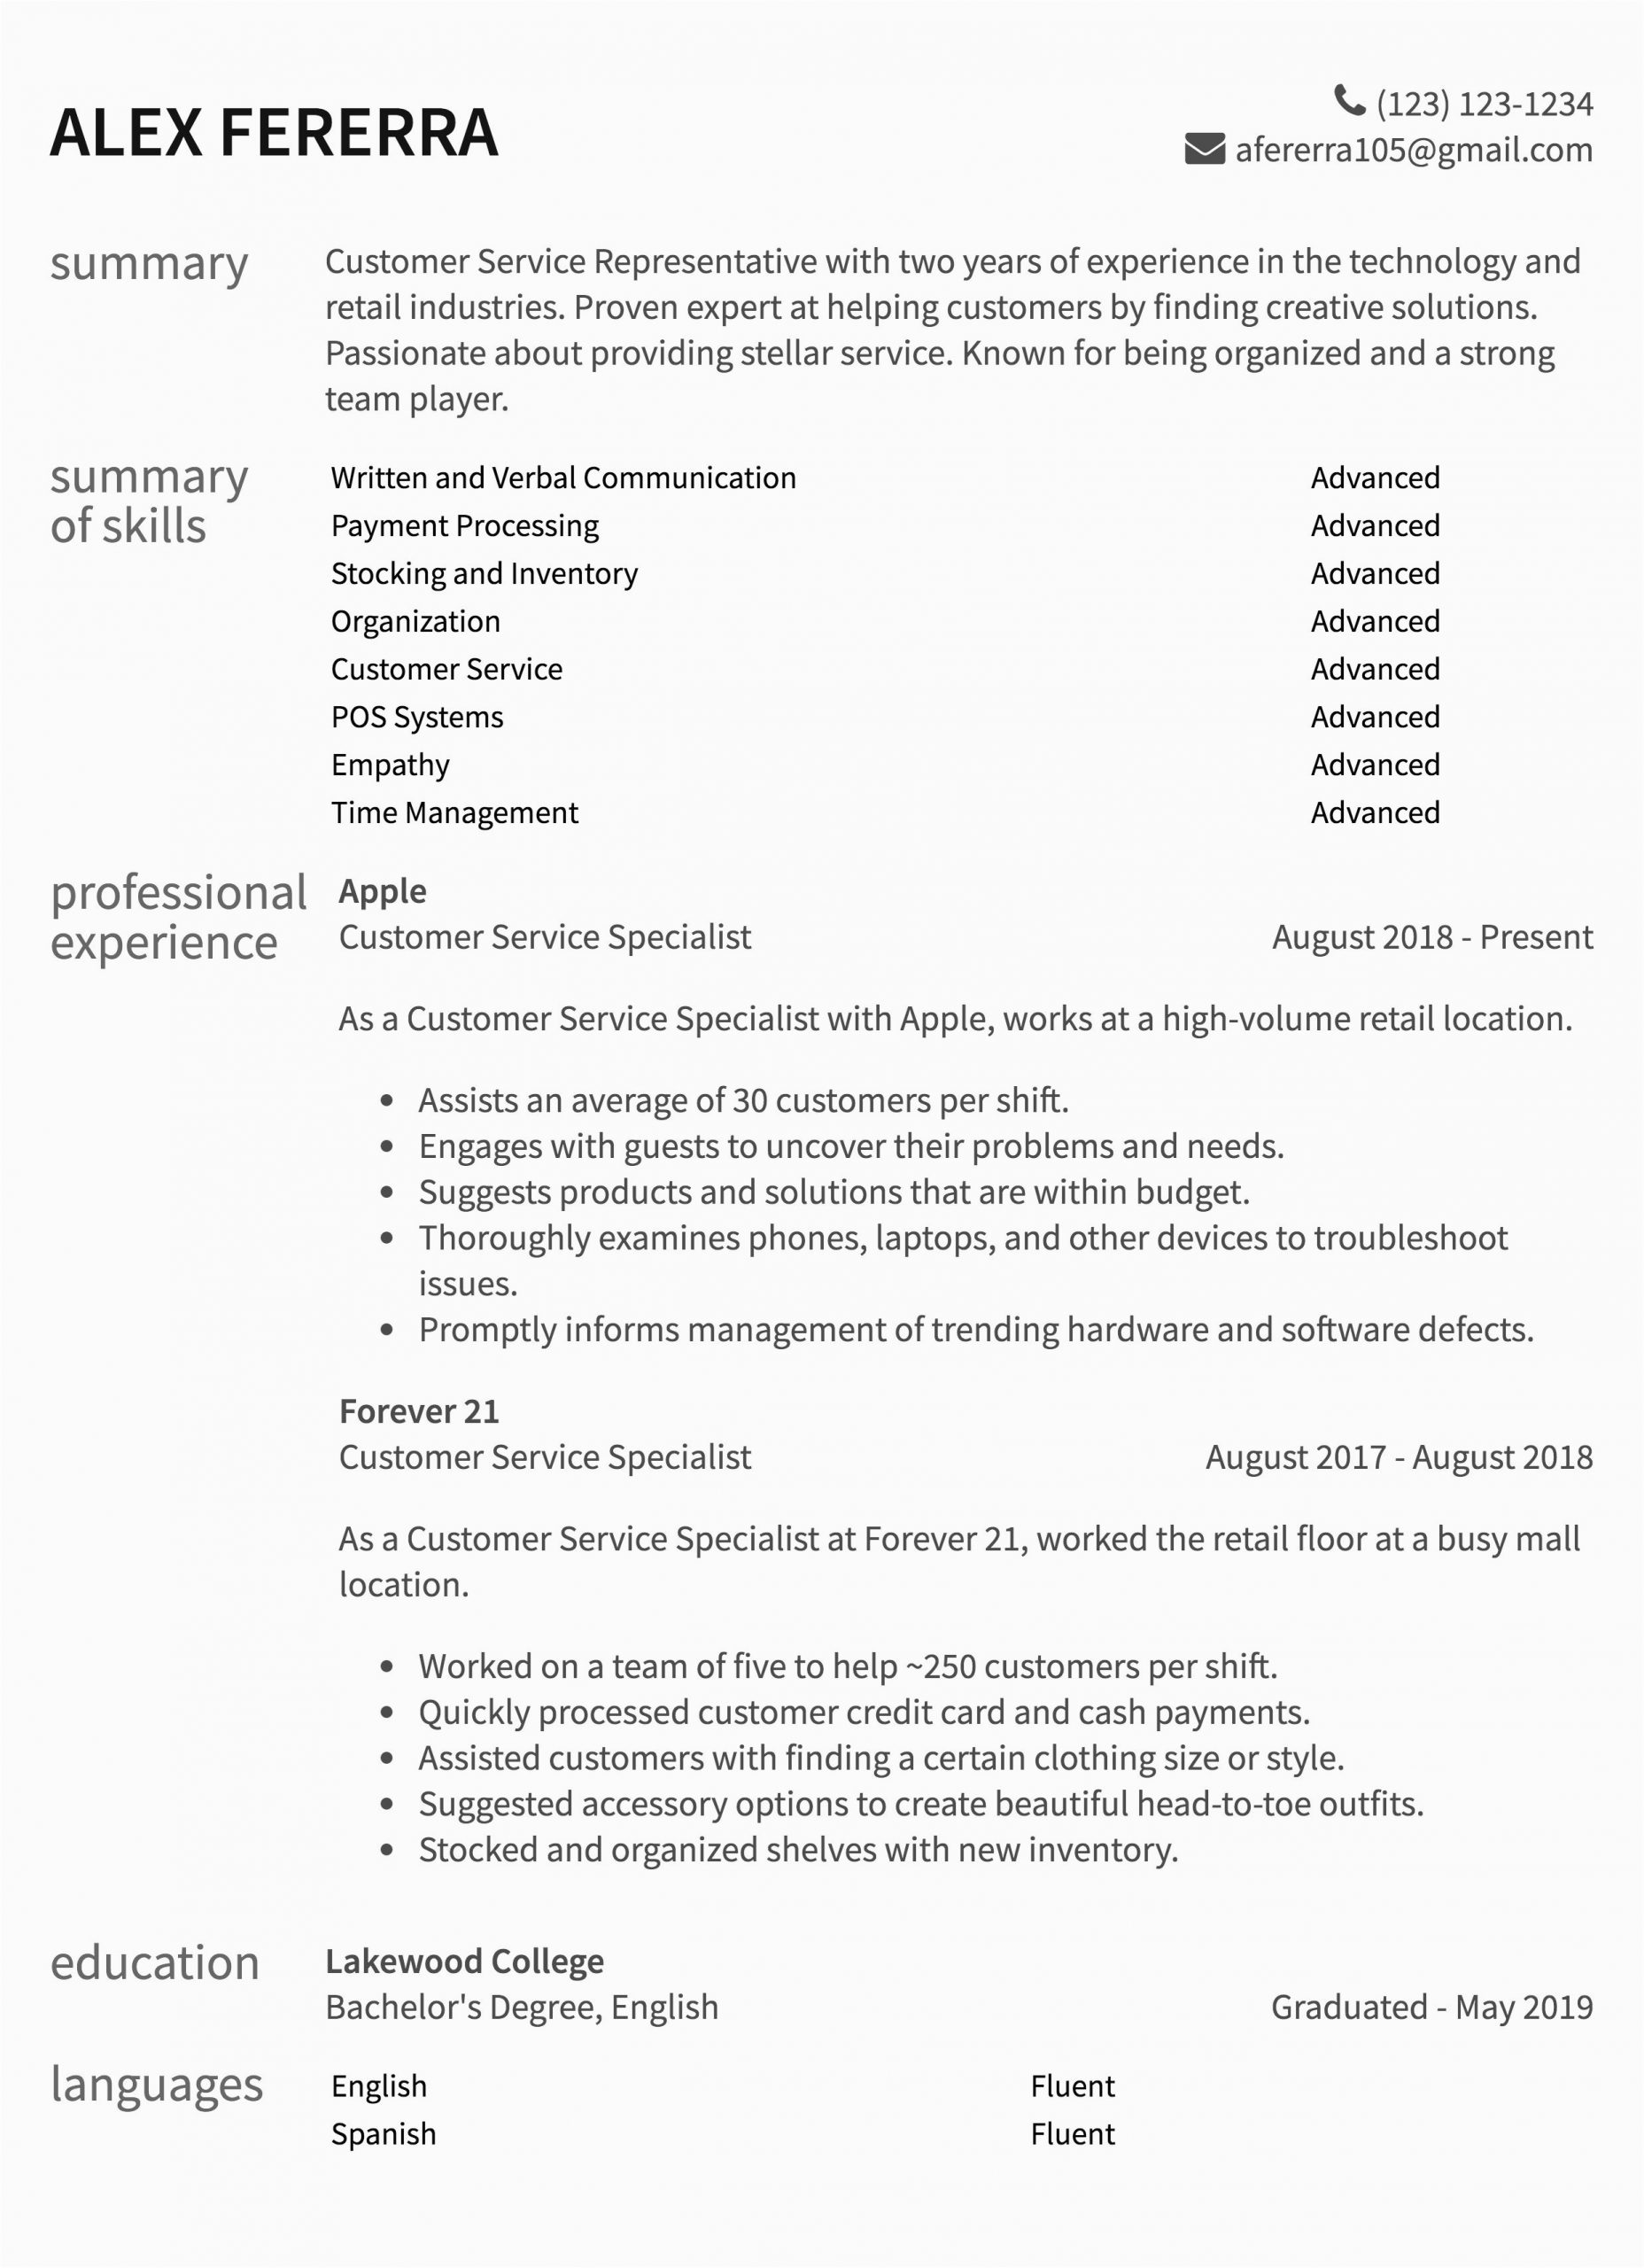 Sample Resume for Customer Service Representative with Experience Customer Service Resume Samples & How to Guide